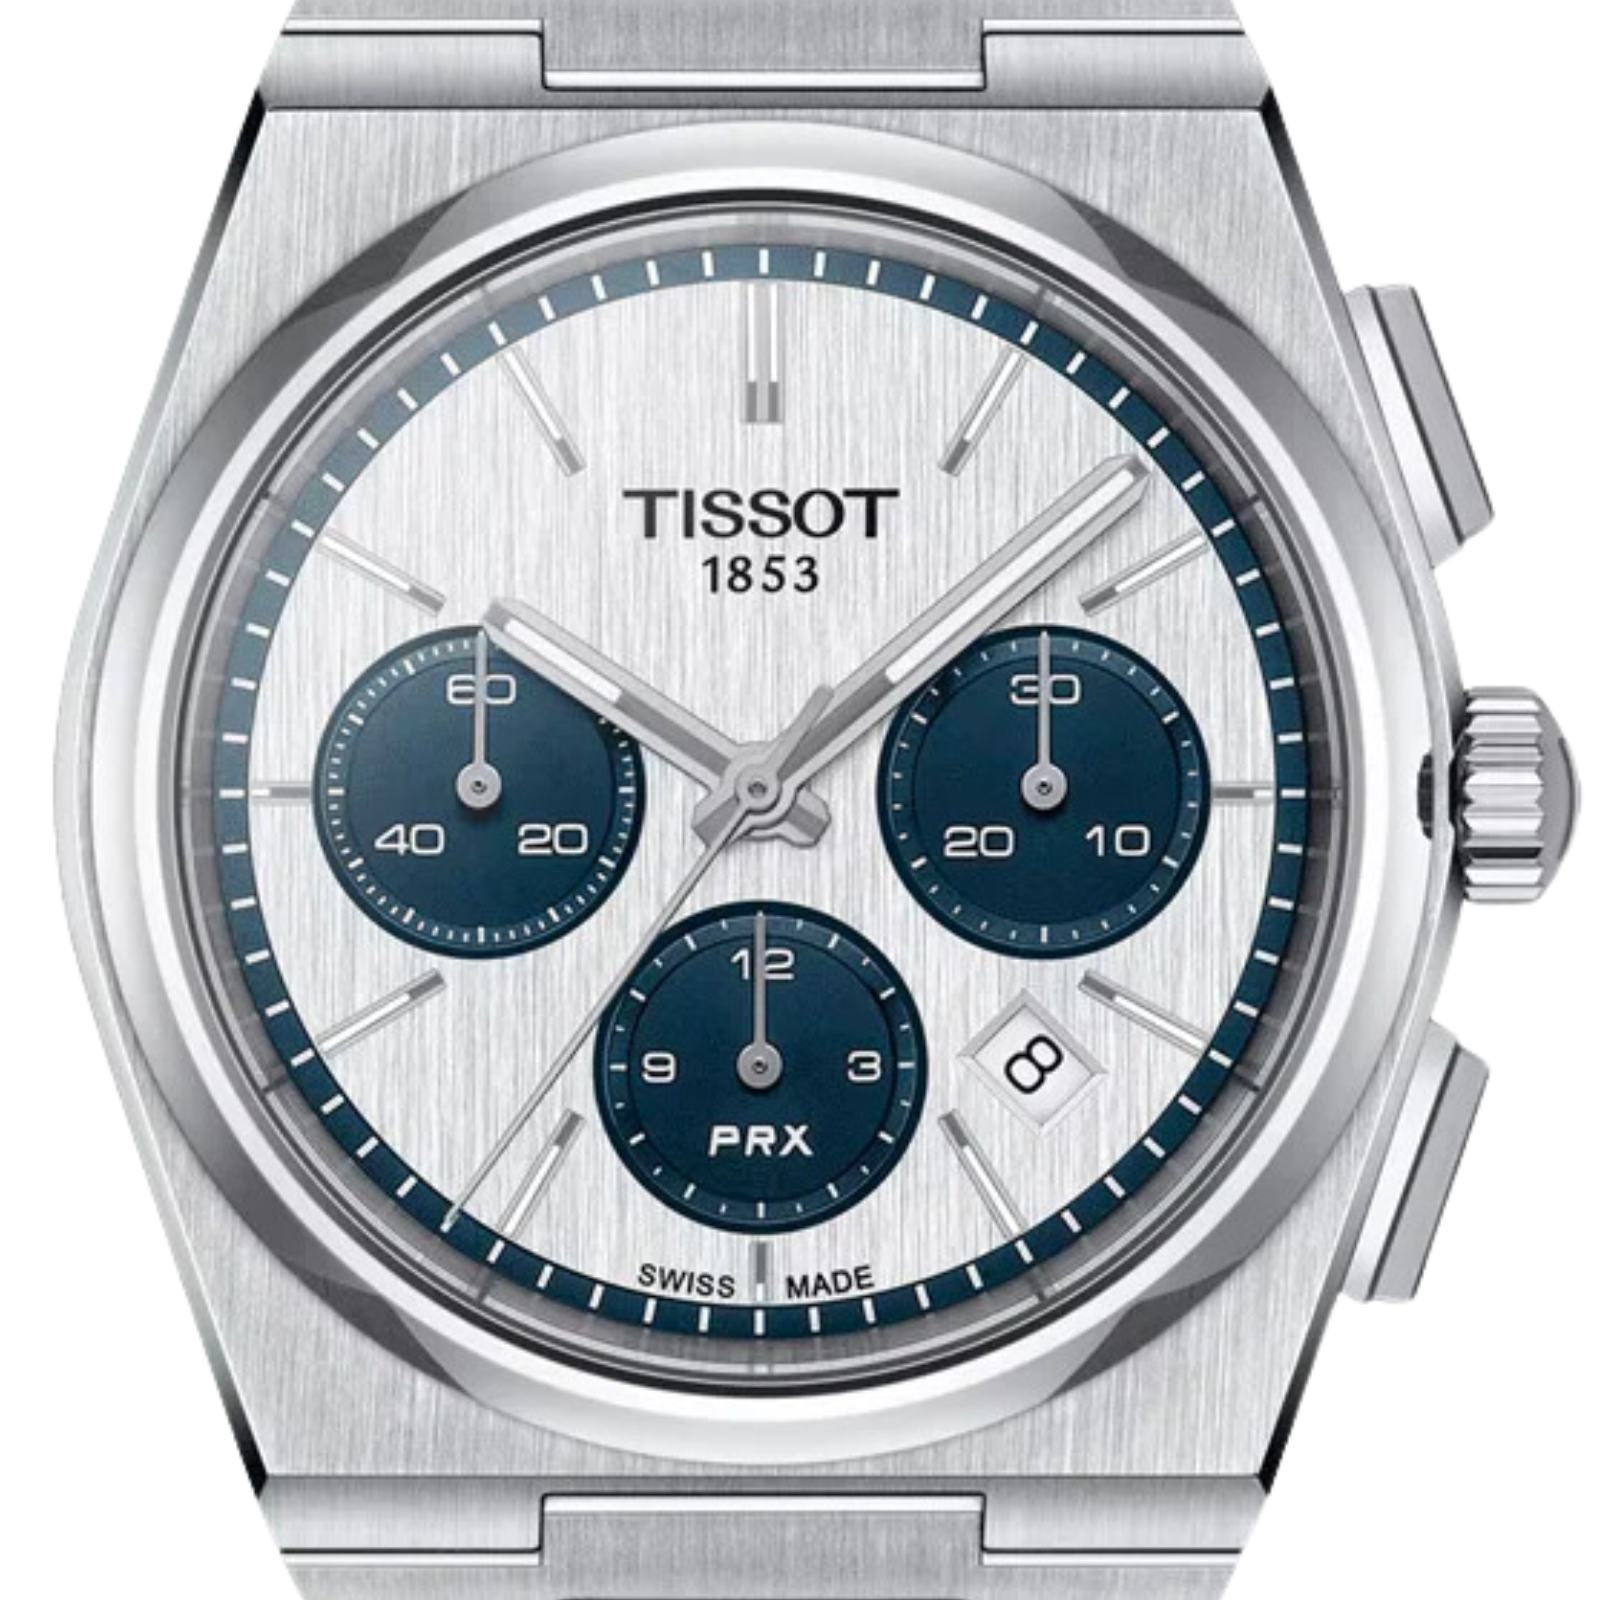 Tissot 1853 PRX T137.427.11.011.01 T1374271101101 Chronograph Automatic White Dial Watch - Skywatches